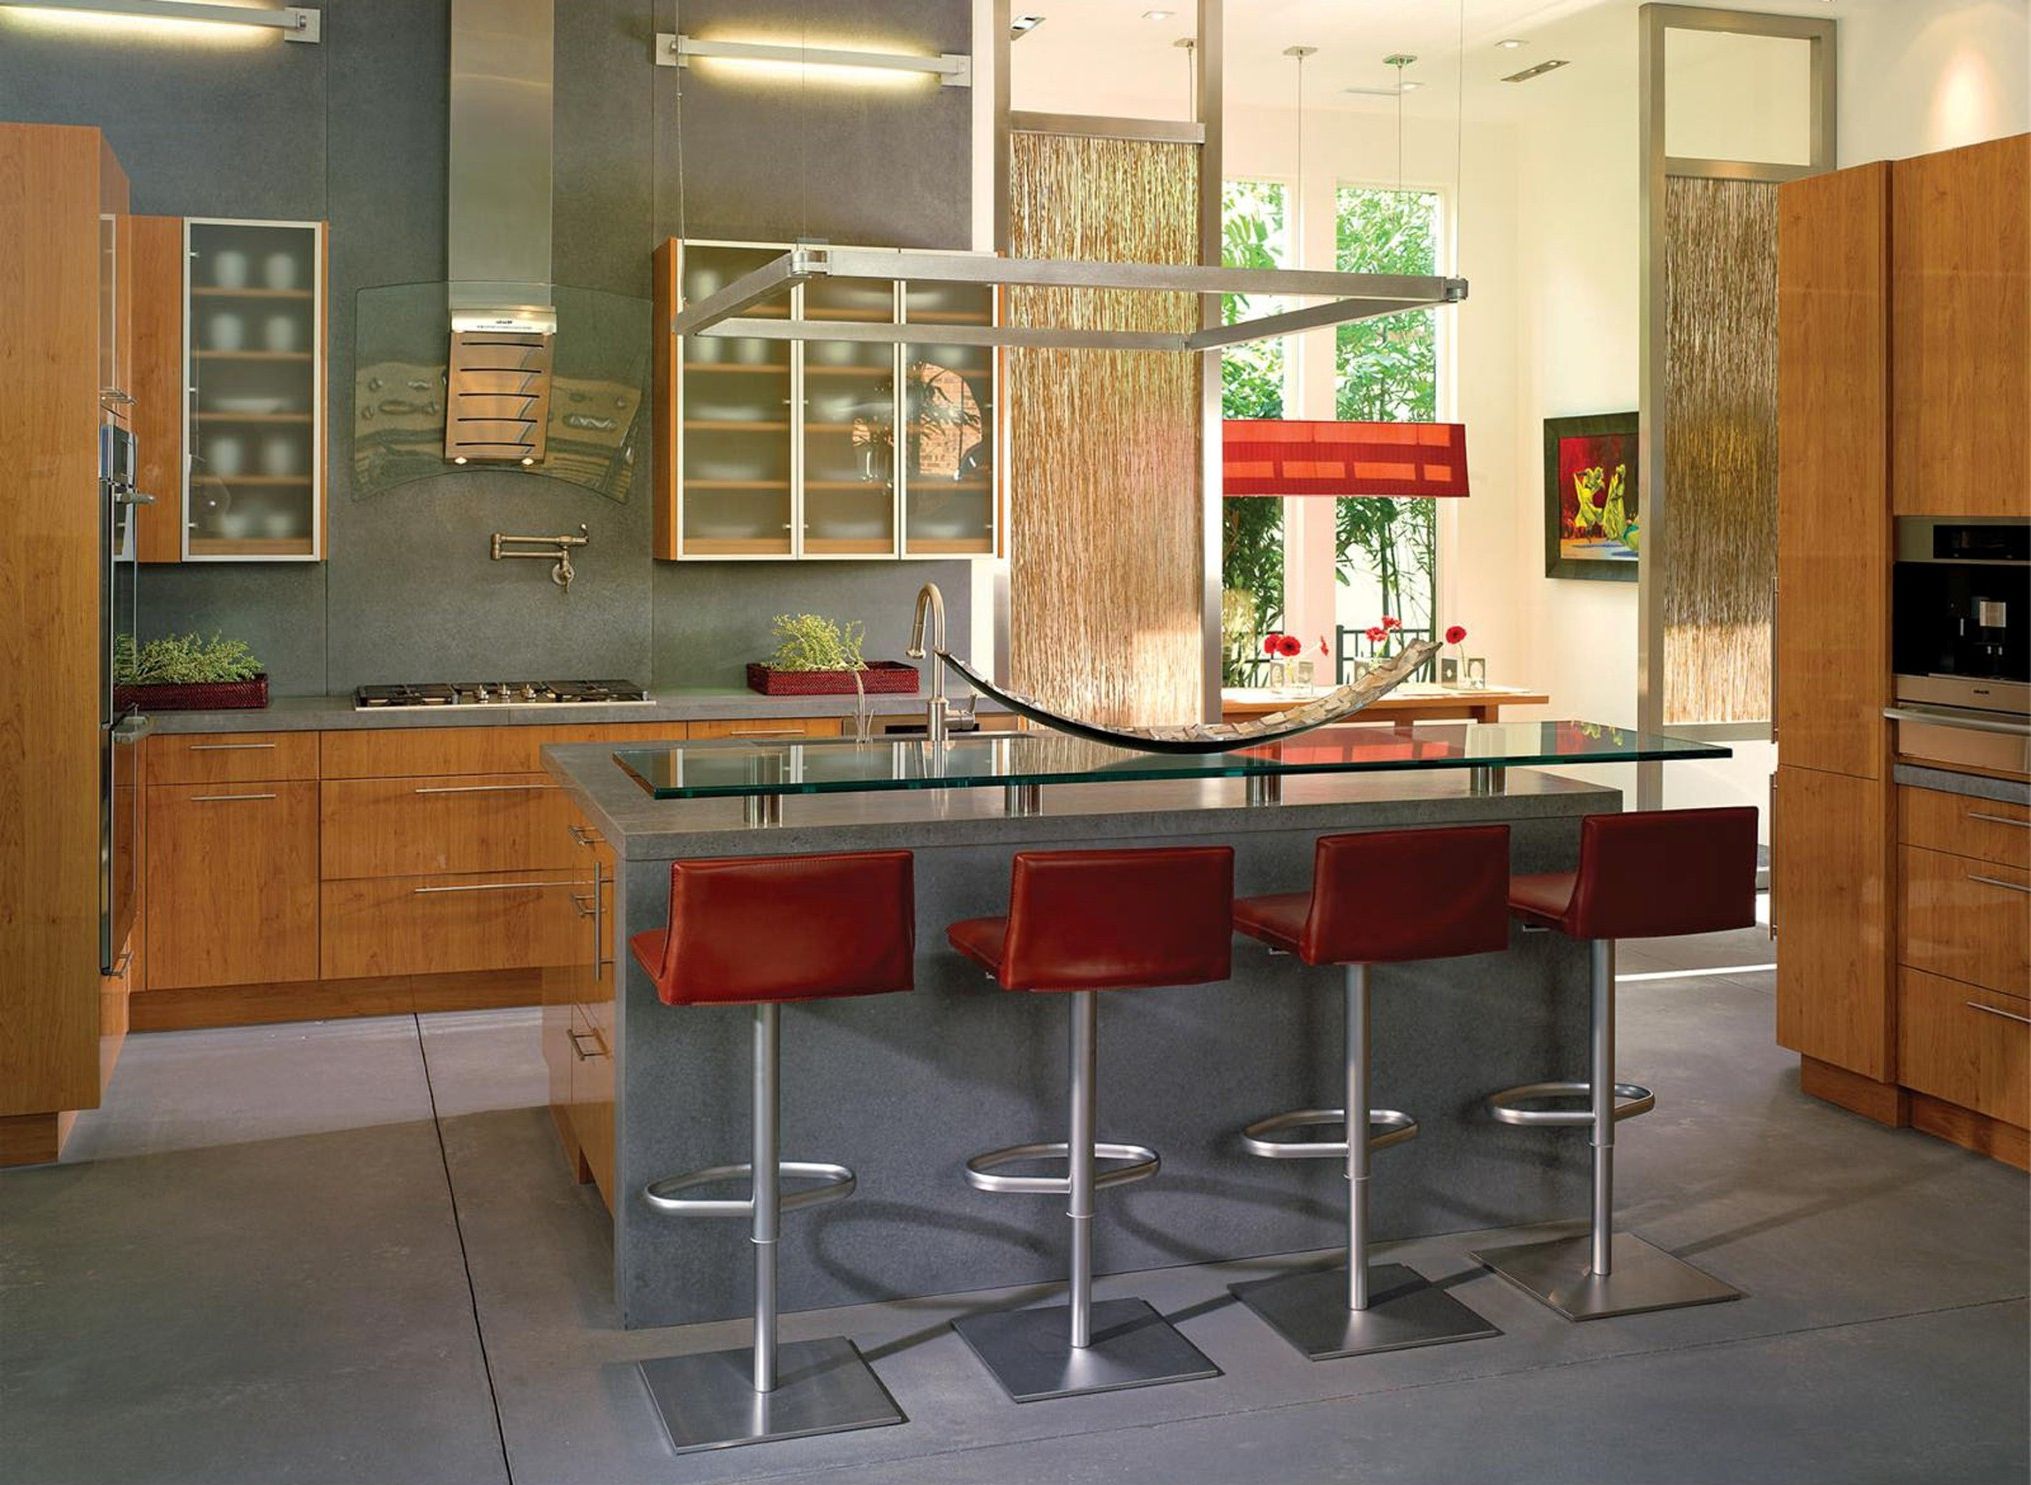 Contemporary Kitchen Flooirng Tile With Red Mini Bar Chairs And Yellow Wooden Cabinet Furniture Also Grey Wallpaper Tile Modern Kitchen Floor Tiles (View 21 of 39)